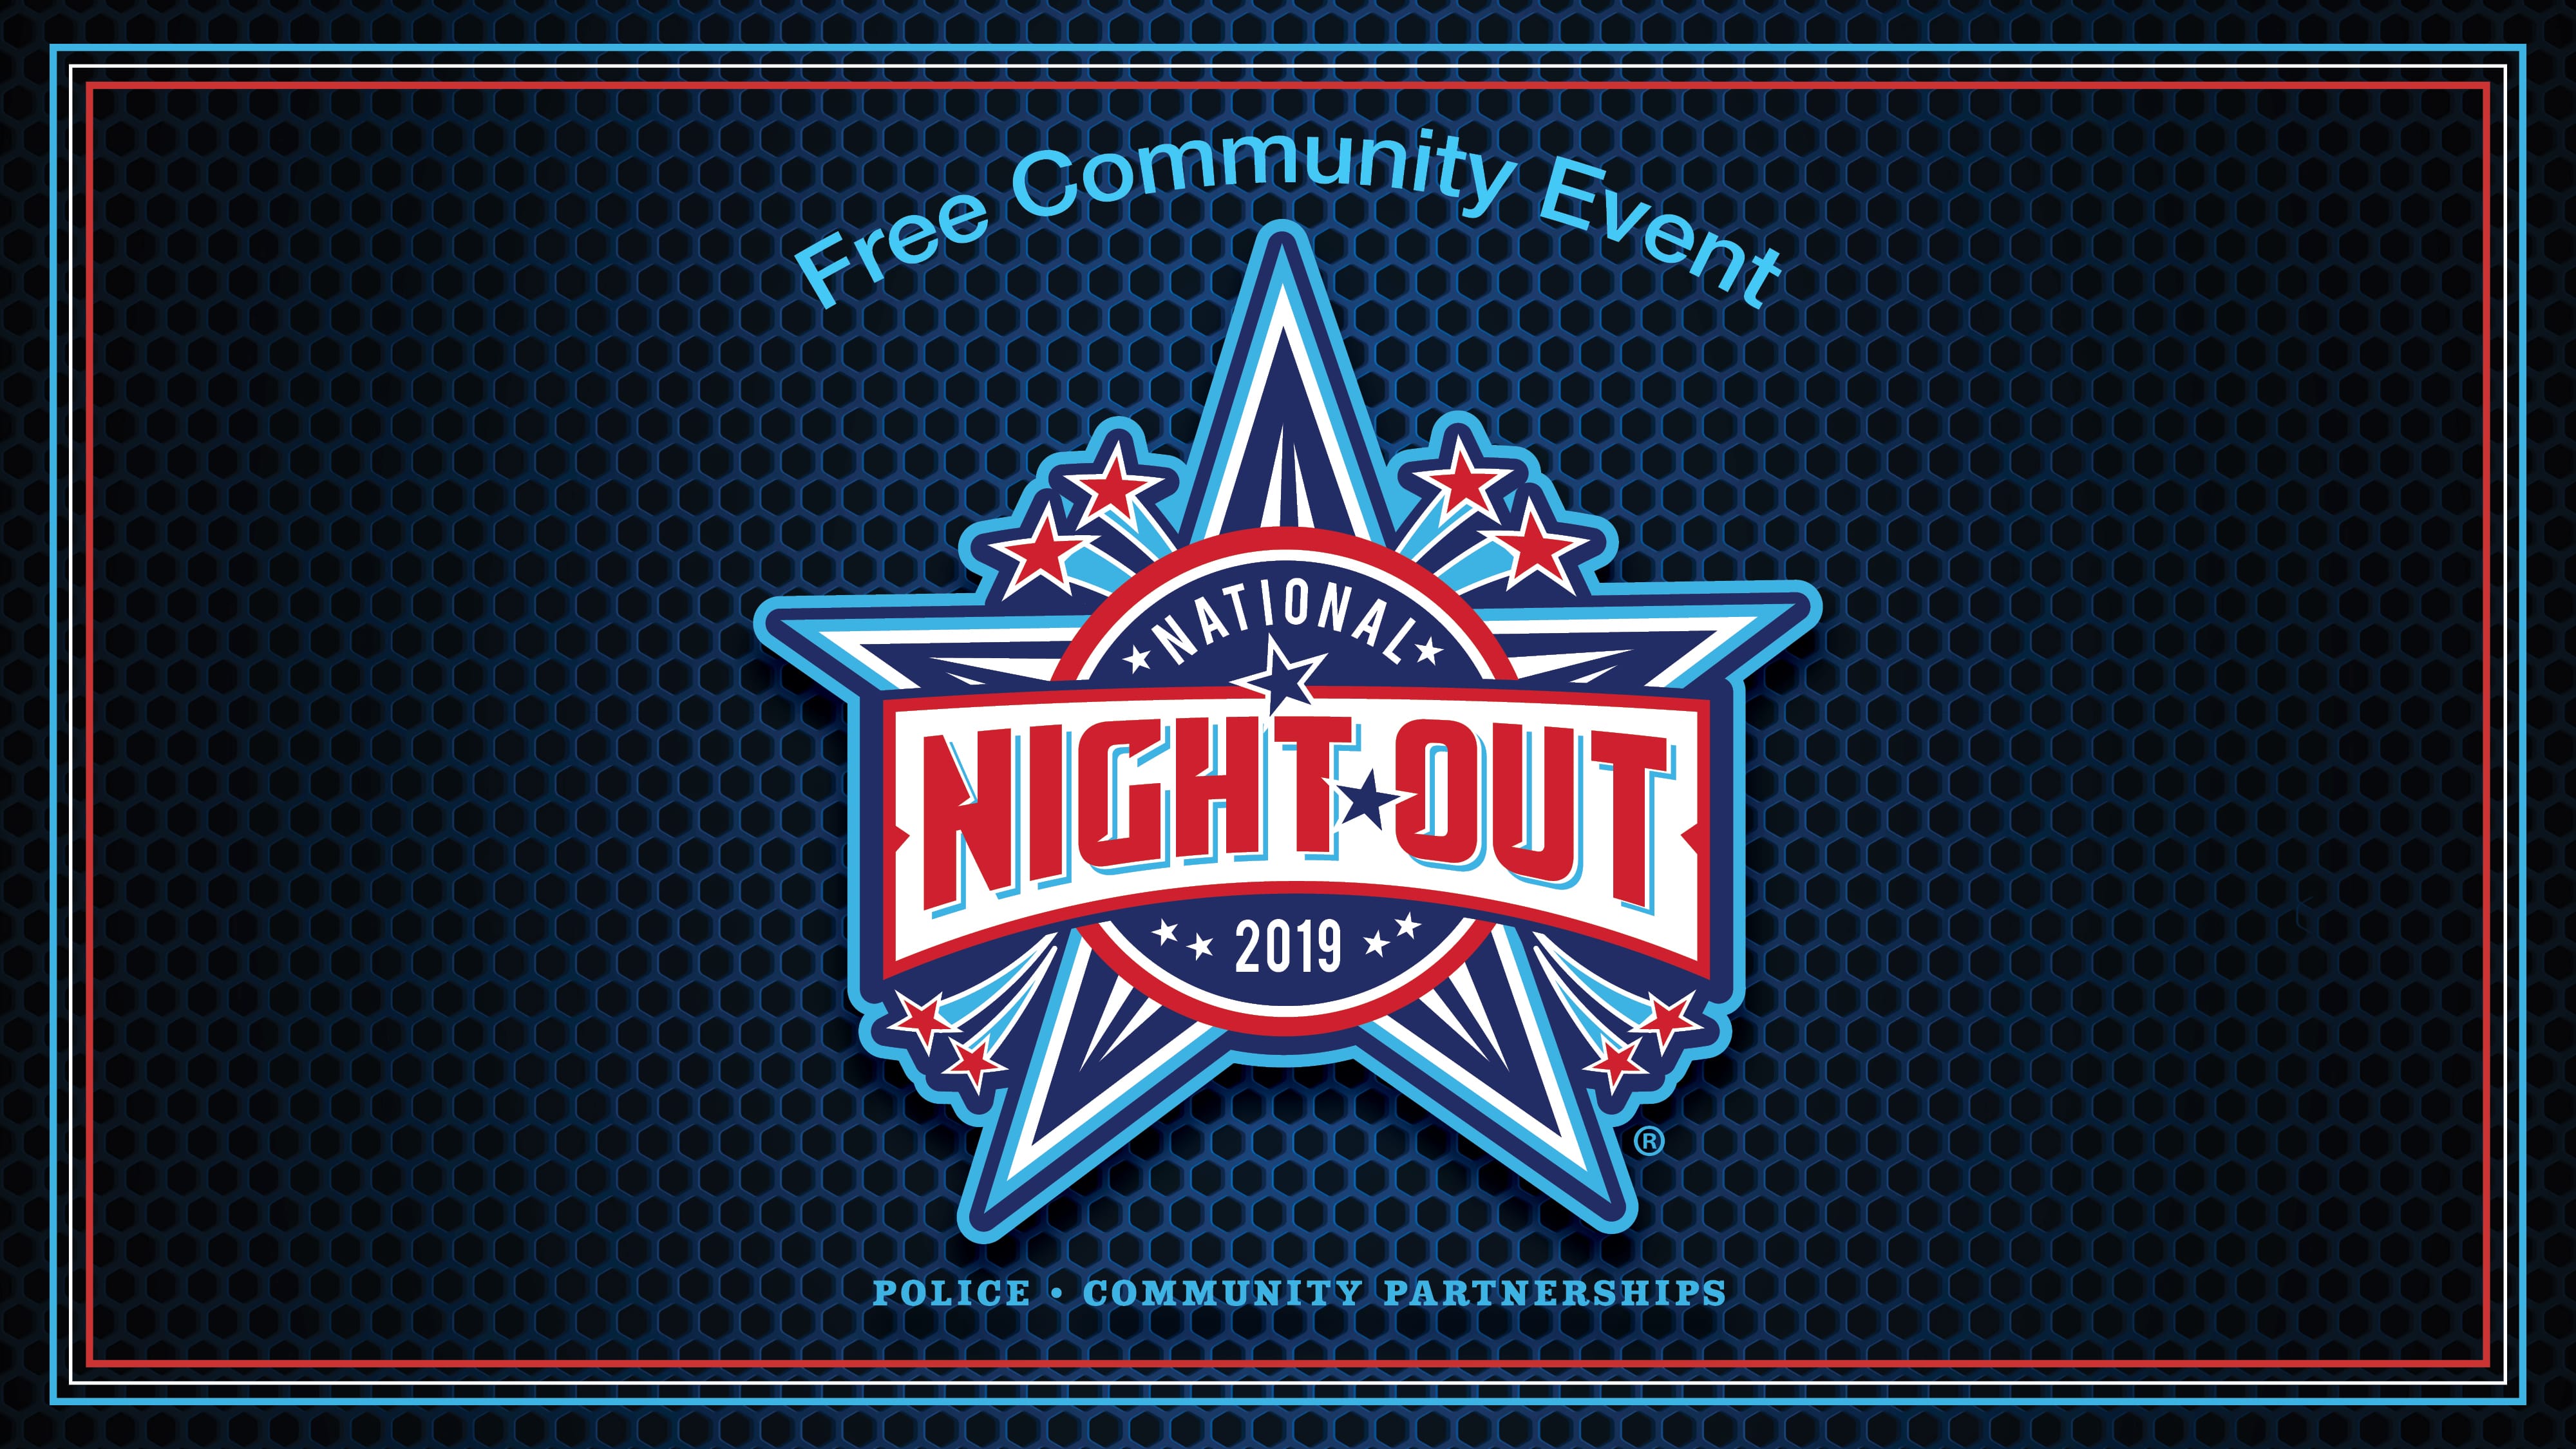 A logo for National Night Out, a free community event